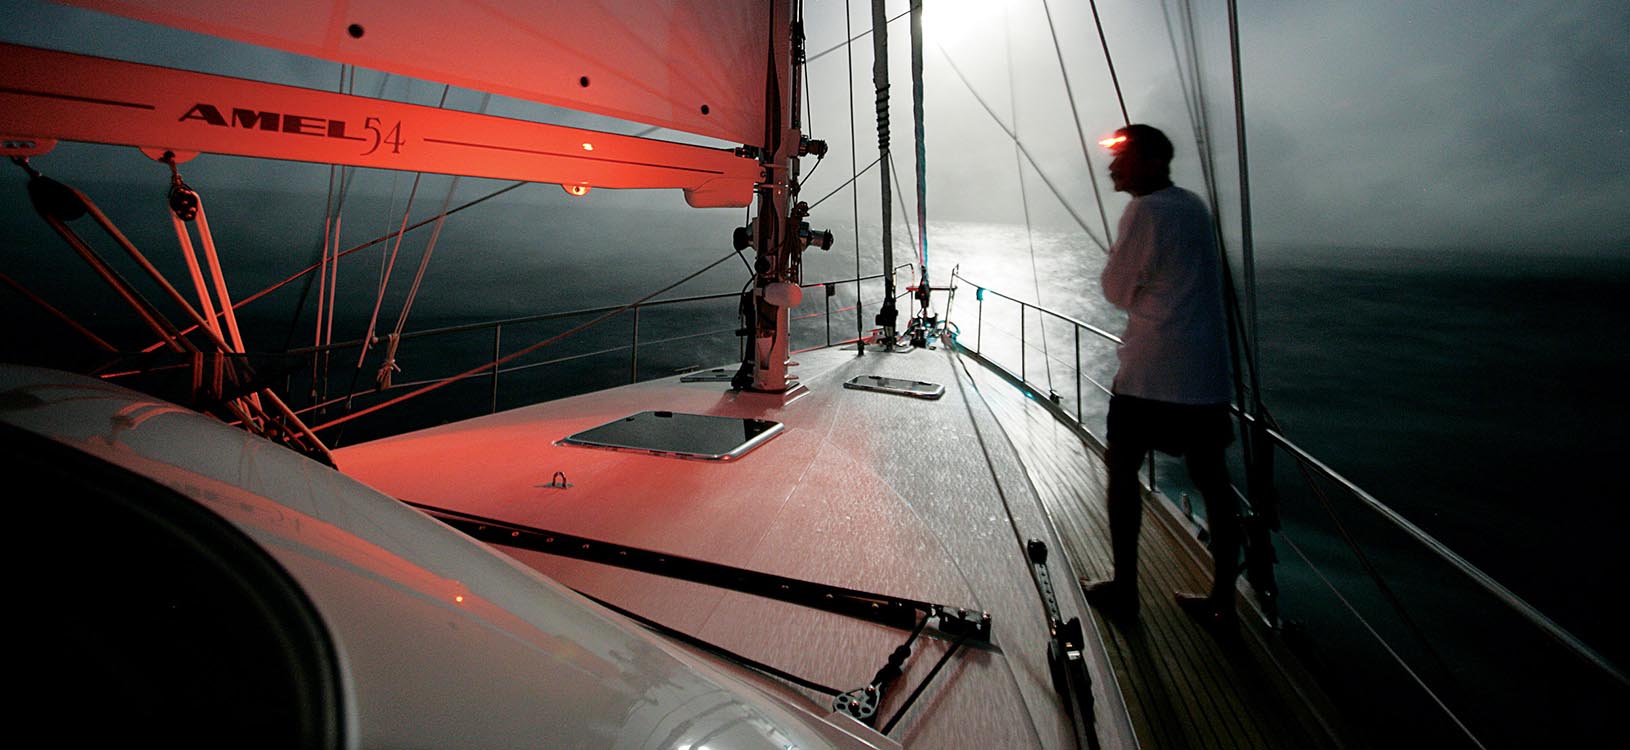 Night vision devices for yachting